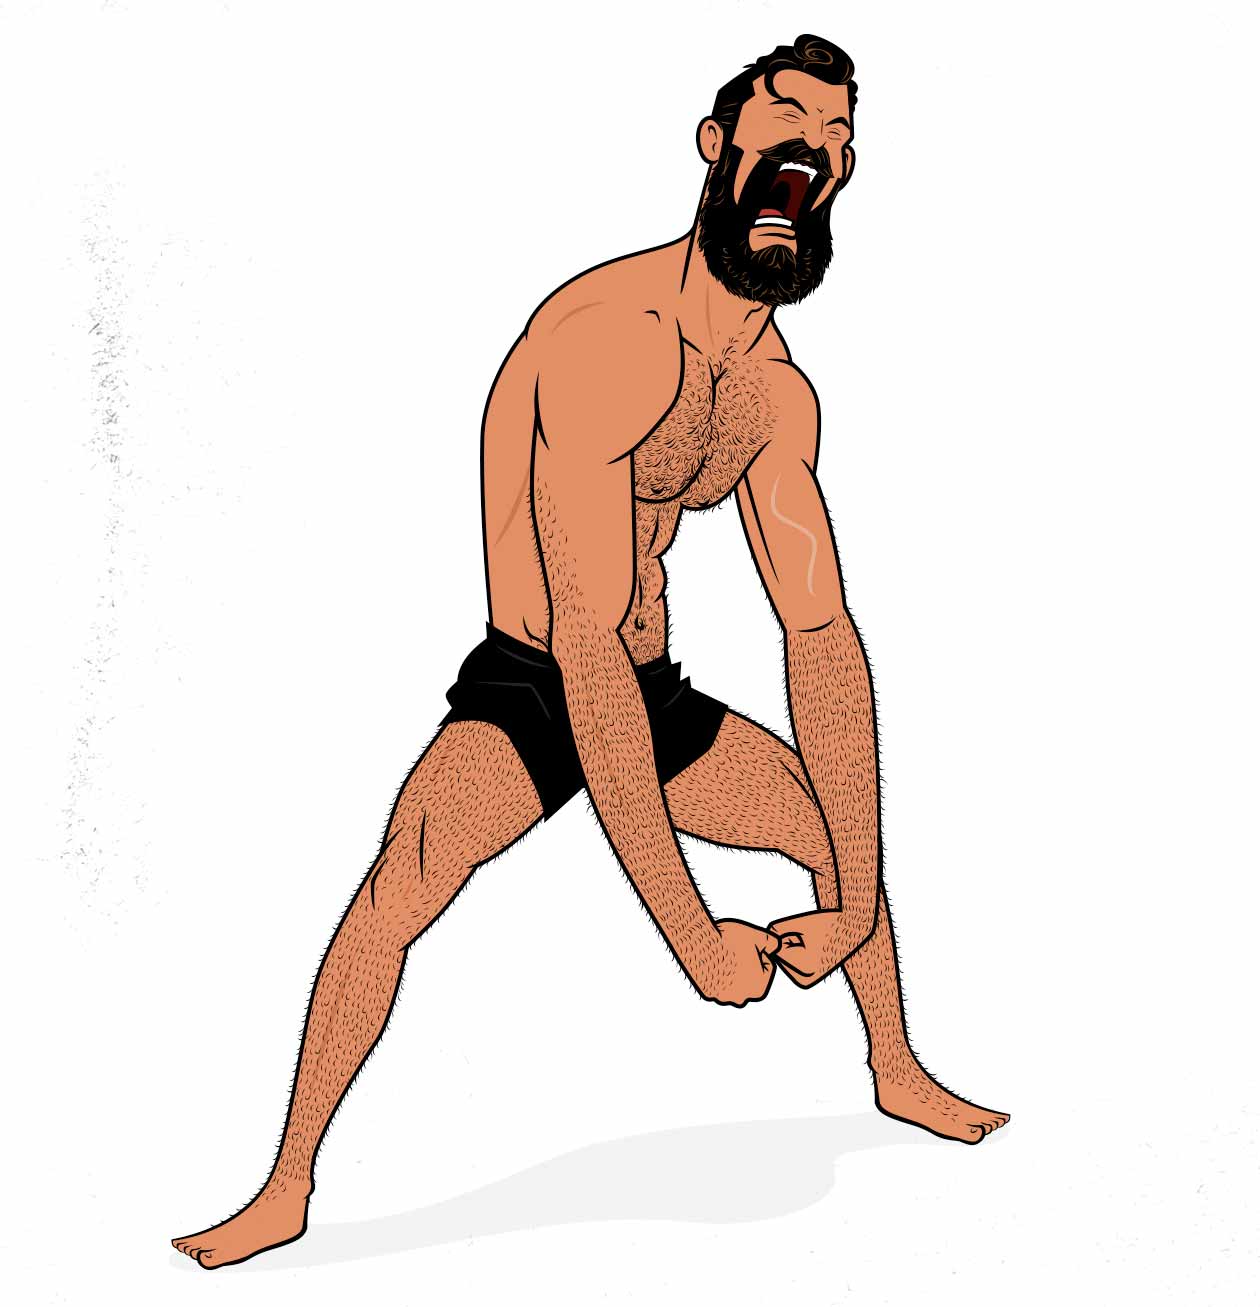 Illustration of a bodybuilder flexing his muscles after doing compound lifts.